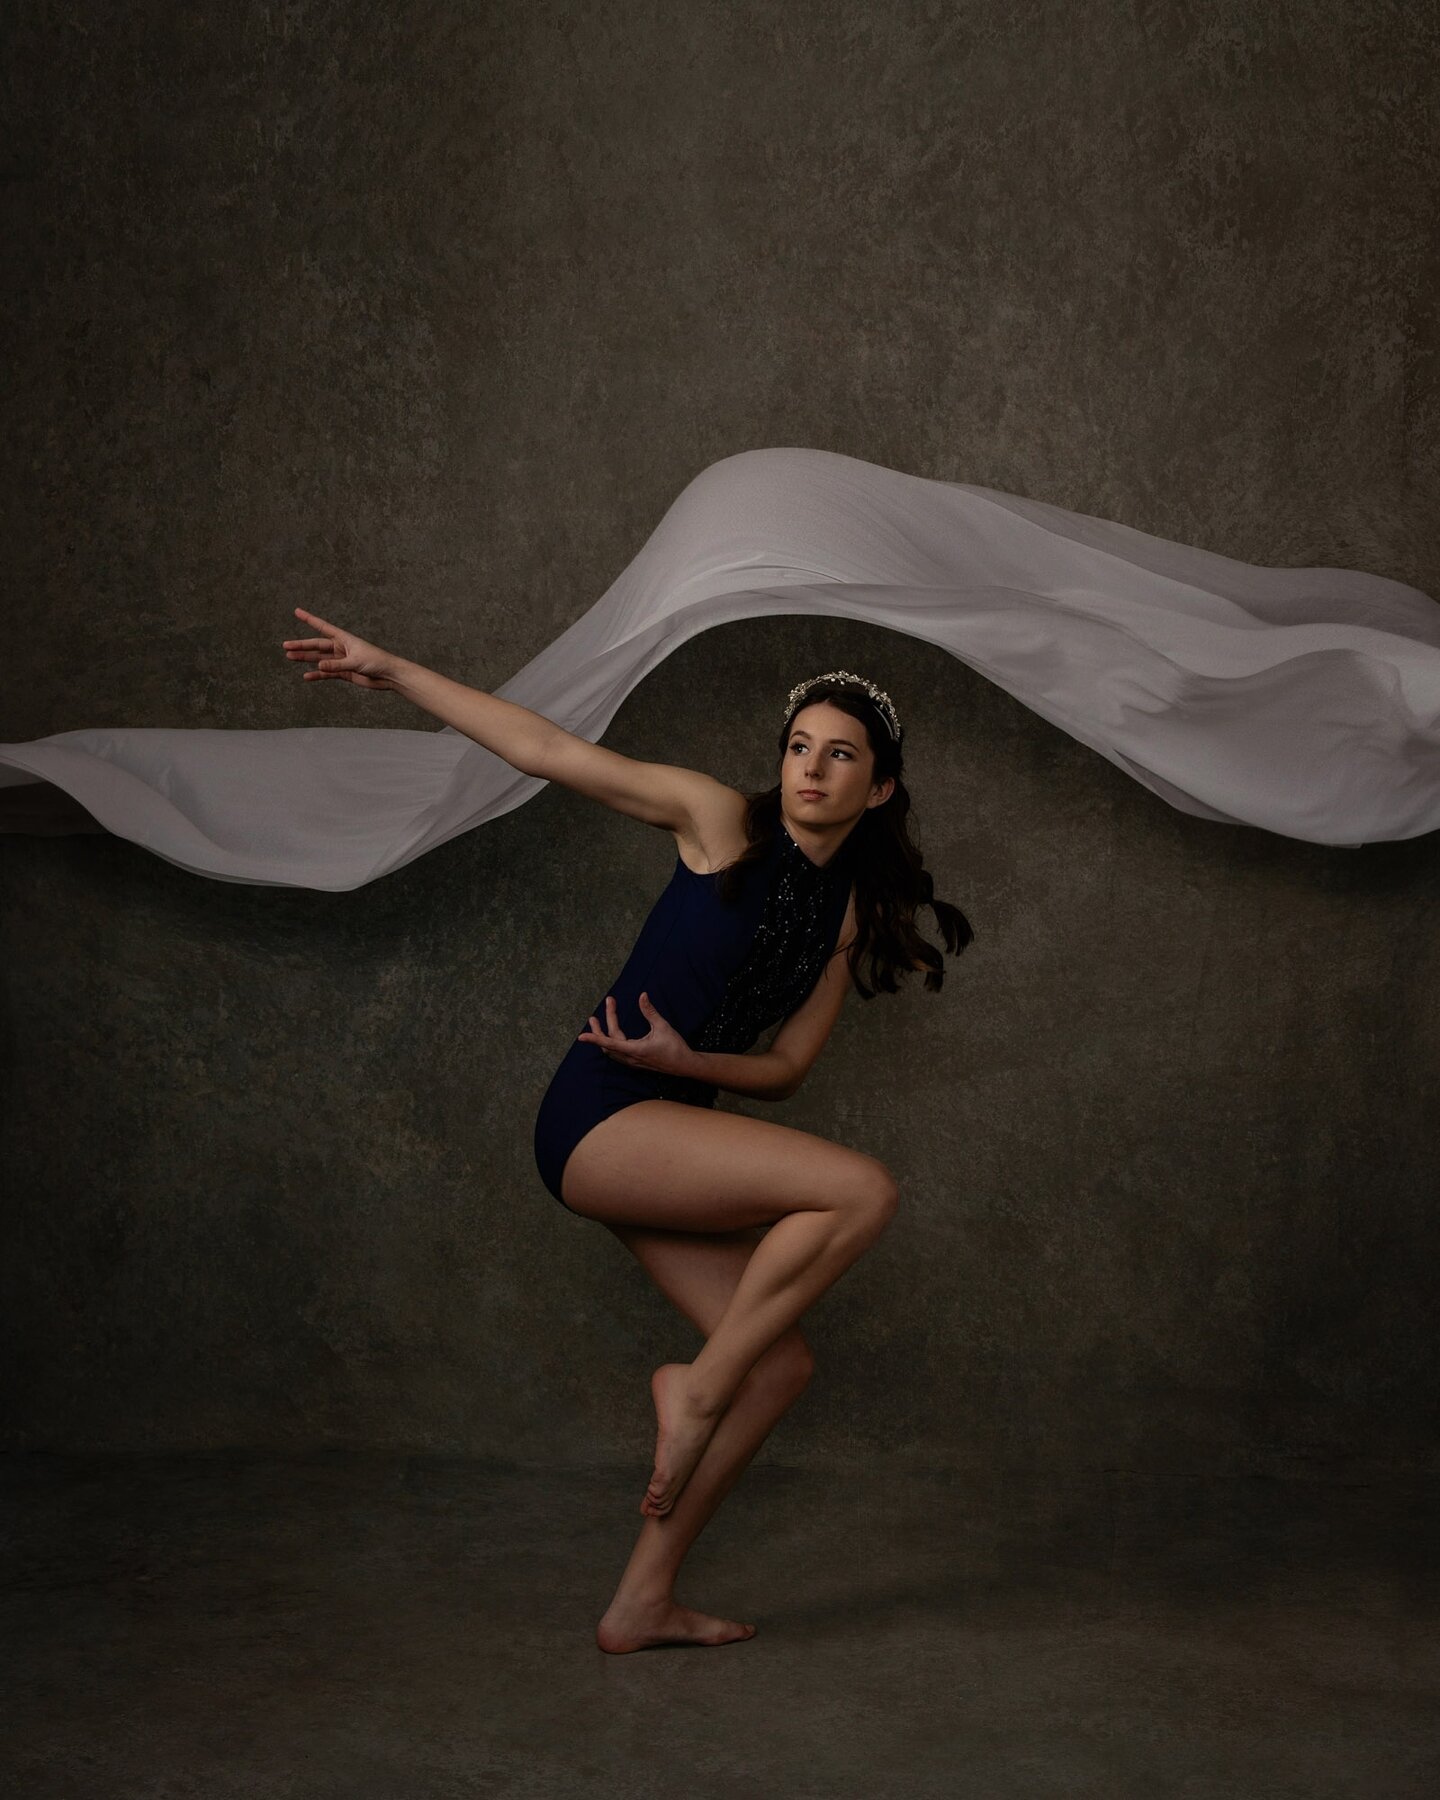 Stella has been dancing since she was 3, owning the stage with such grace and energy! Obsessed with these images of Stella, she looks like a painting!

Wardrobe: @willowbeanstudio
Hair and makeup: @simply_chicbeauty

#danceportrait #navydancewardrobe